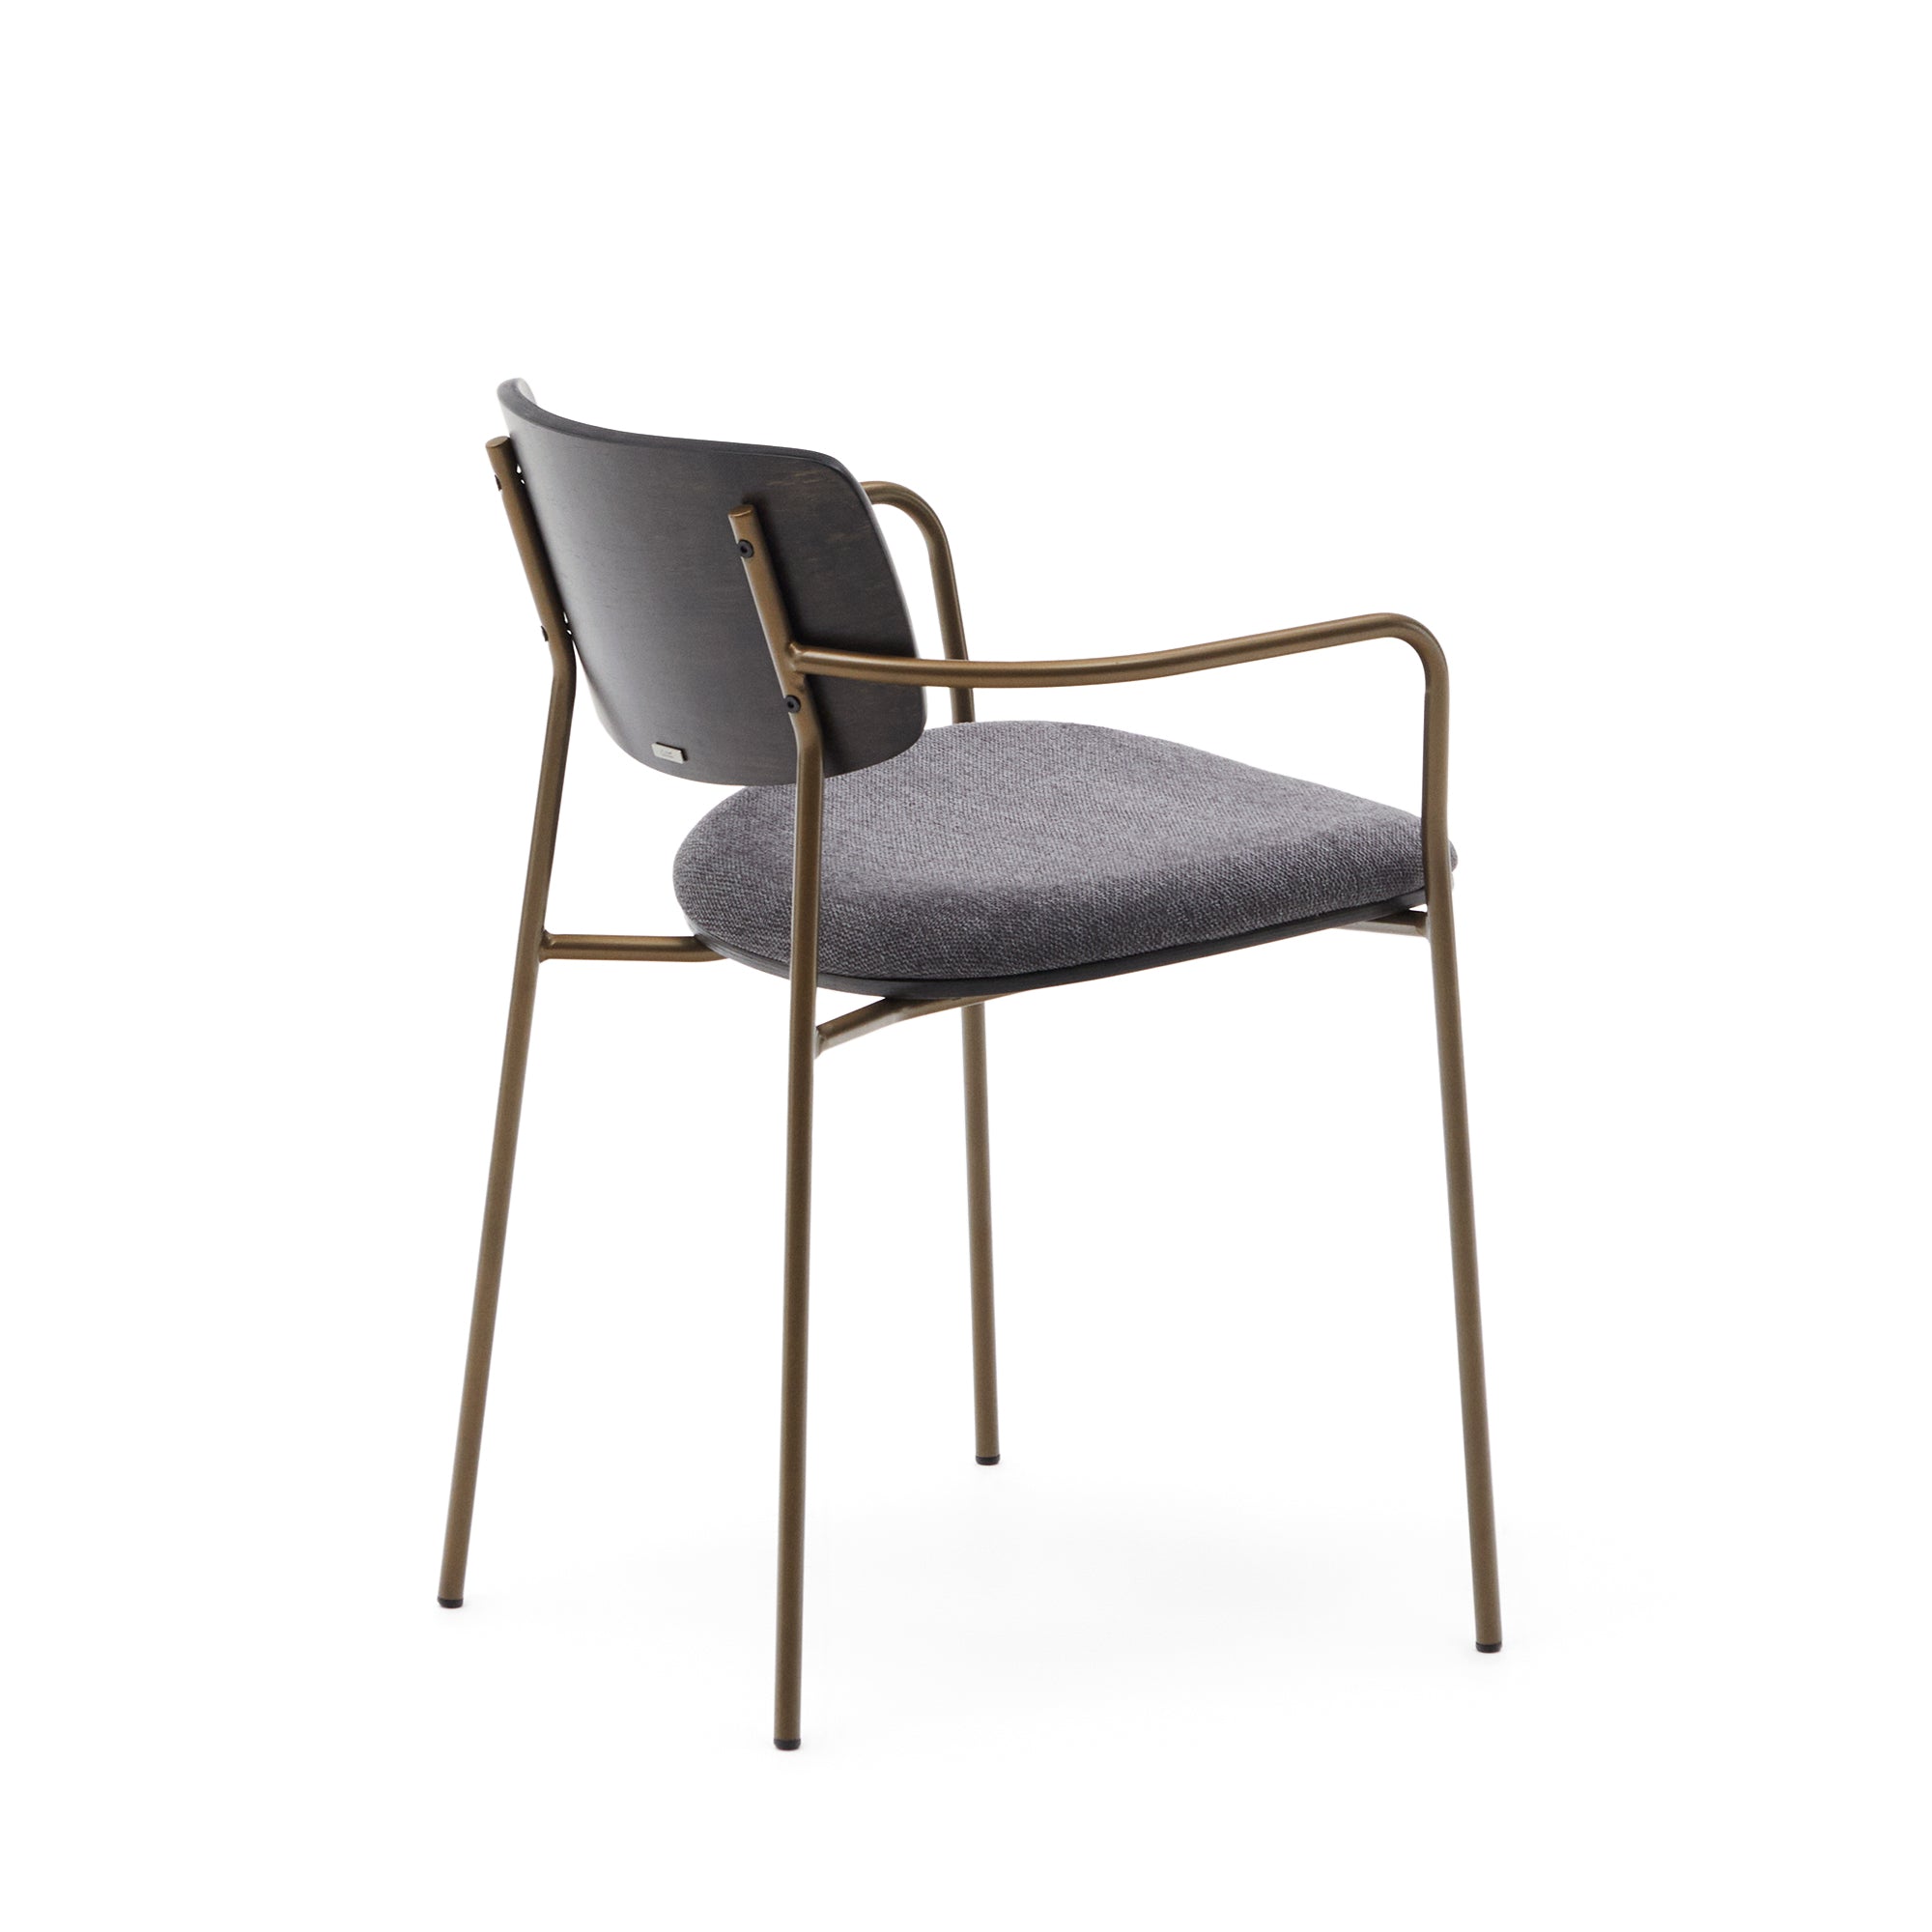 Maureen stackable chair with ash veneer in dark finish and metal in brass finish